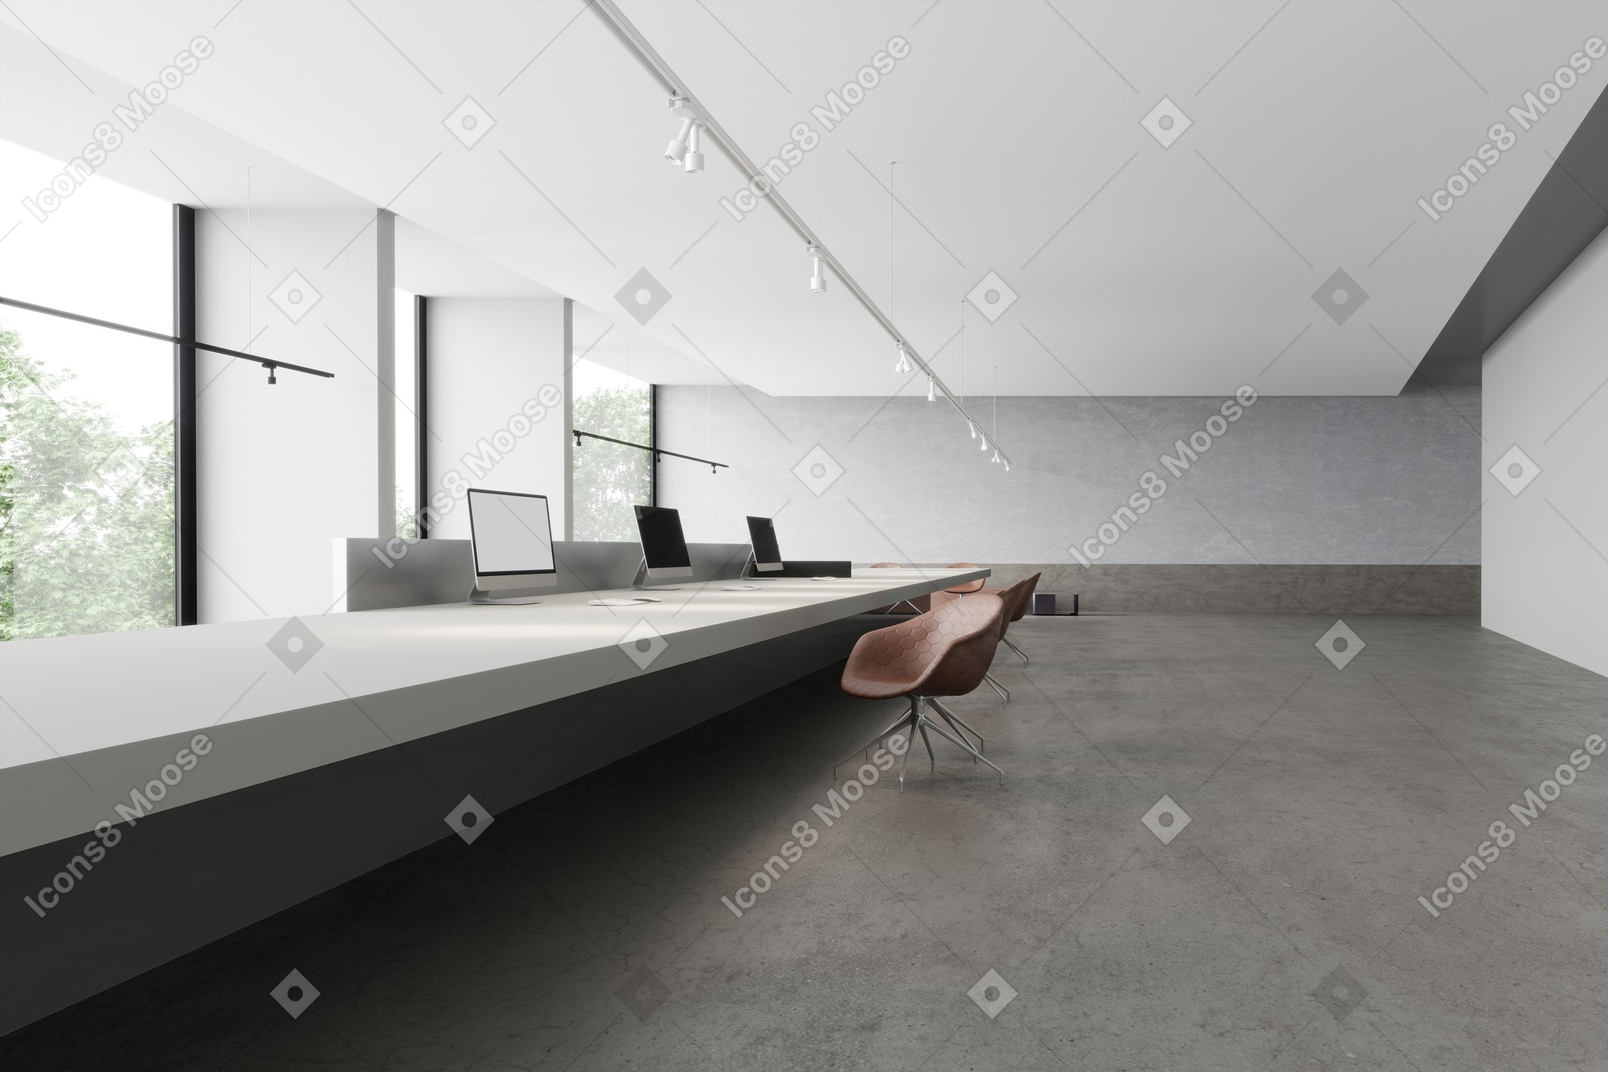 An empty office room with natural light and naked walls